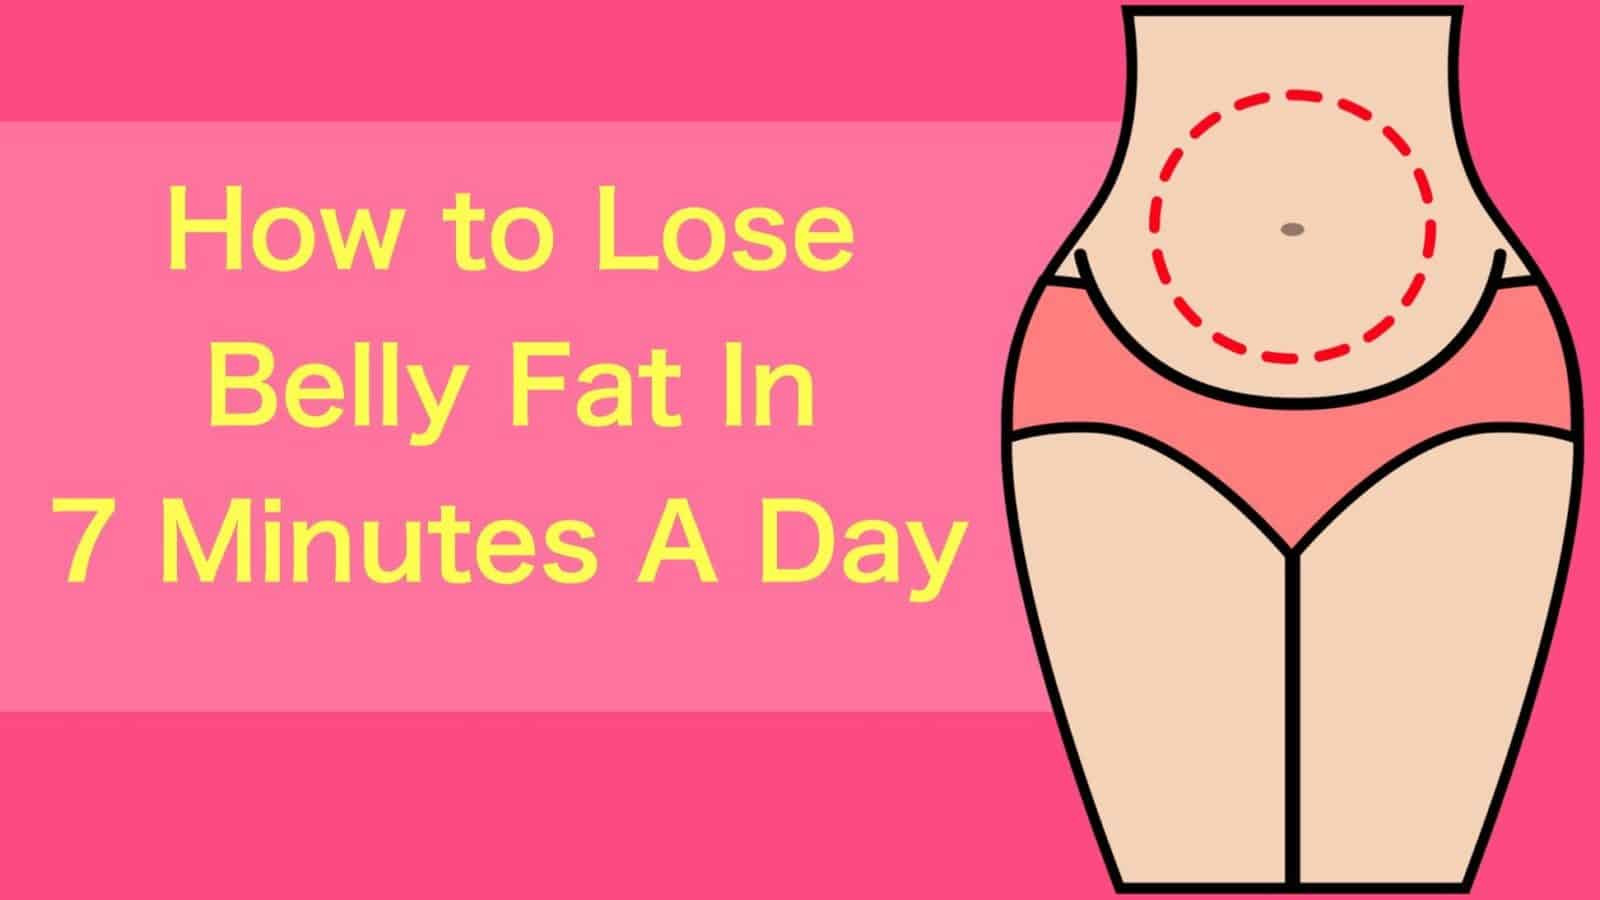 How To Lose Belly Fat In 7 Days
 How to Lose Belly Fat In 7 Minutes A Day